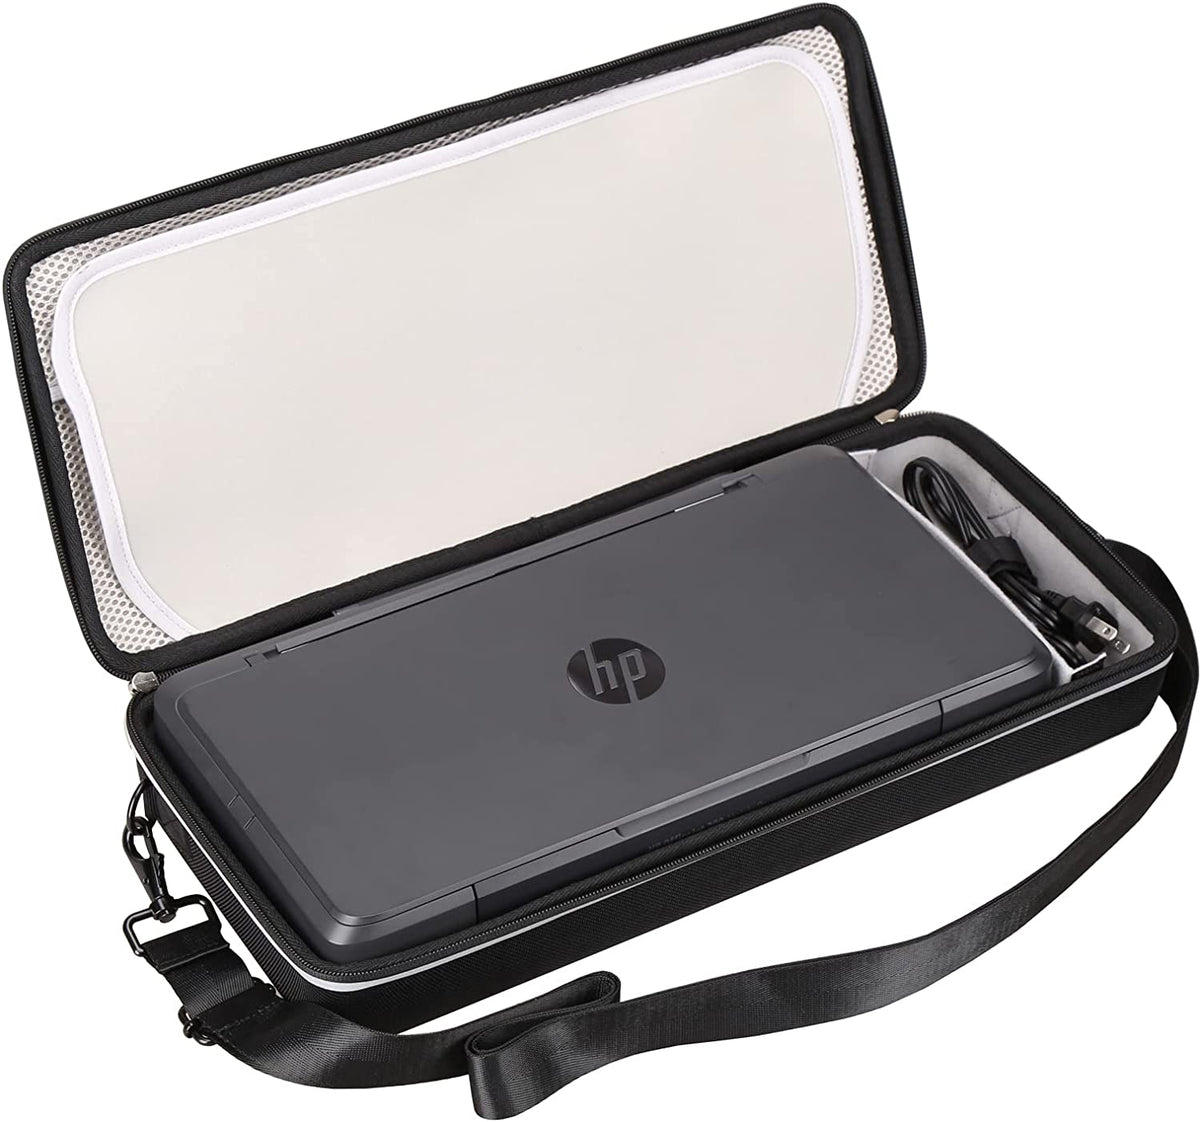 Hard Storage Carry Case for HP Officejet 200 Portable Printer with Wireless & Mobile Printing CZ993A, EVA Protective Travel Bag Shockproof with Removable Shoulder Strap (Case Only)